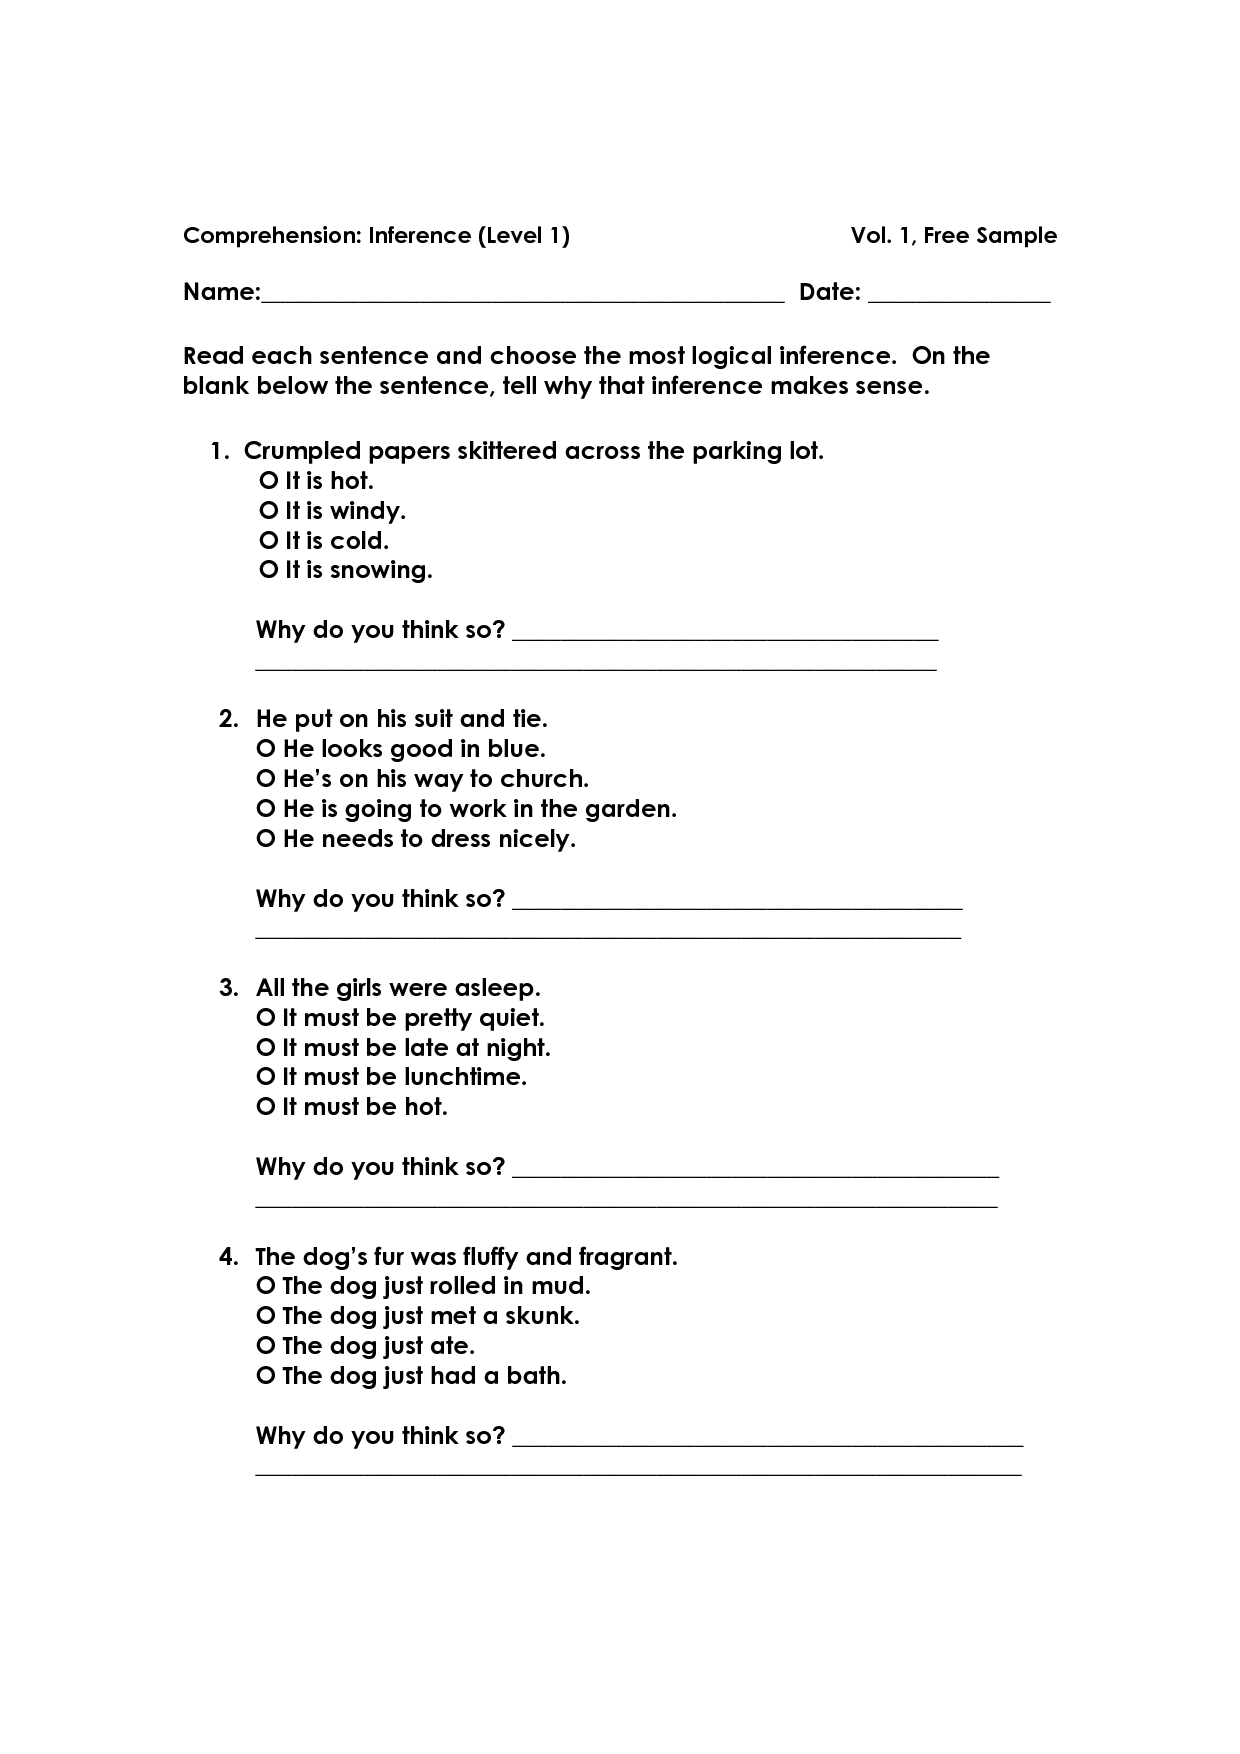 13-best-images-of-inferences-worksheets-with-answers-inference-worksheets-5th-grade-printable